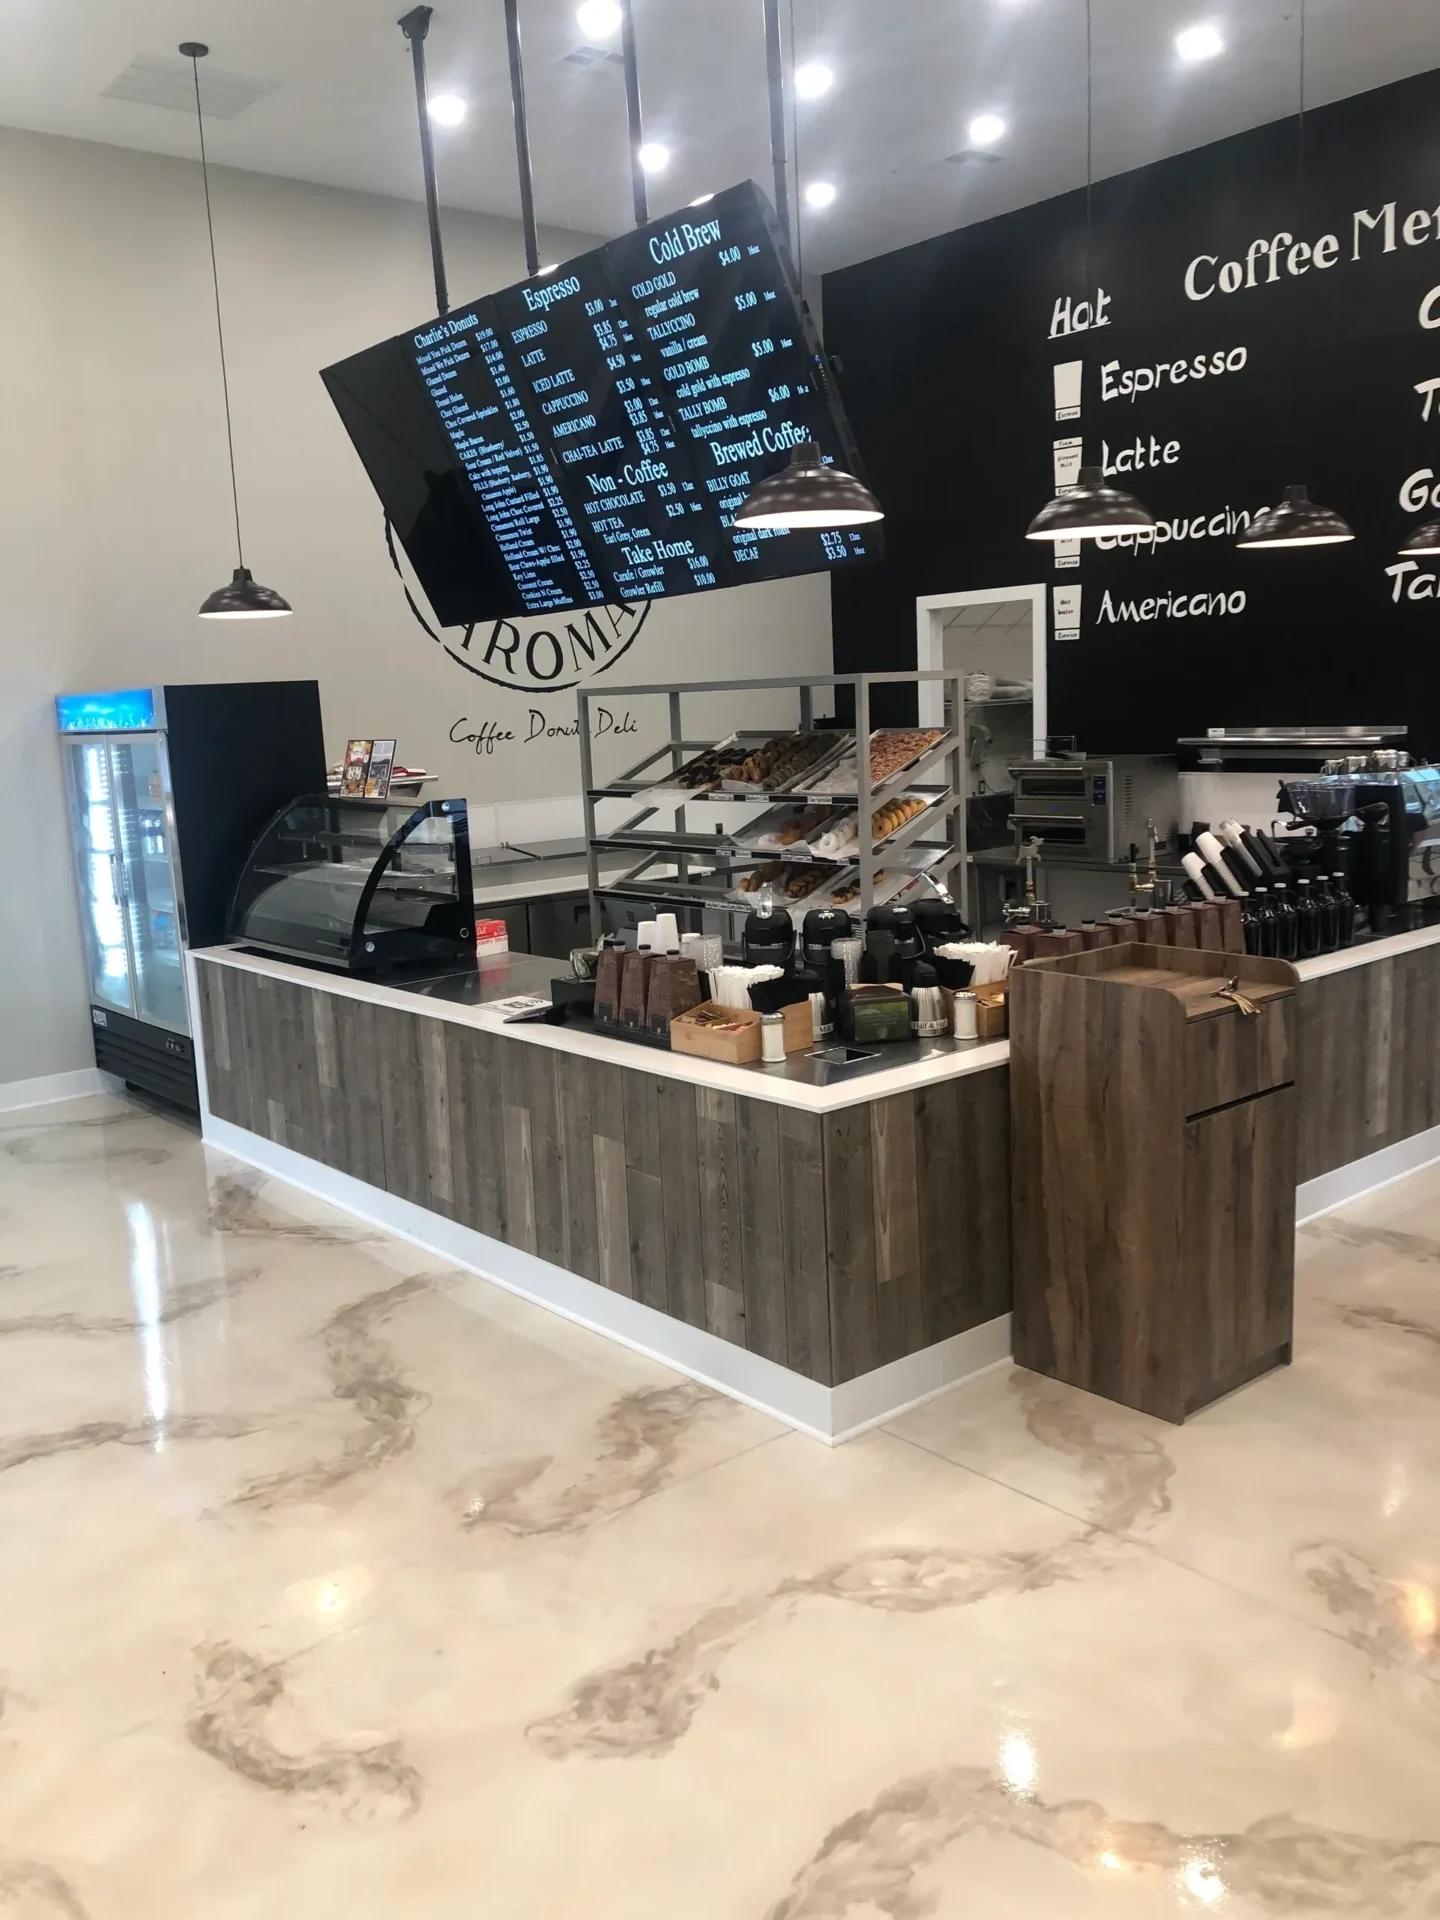 A coffee shop with a counter and menu board.